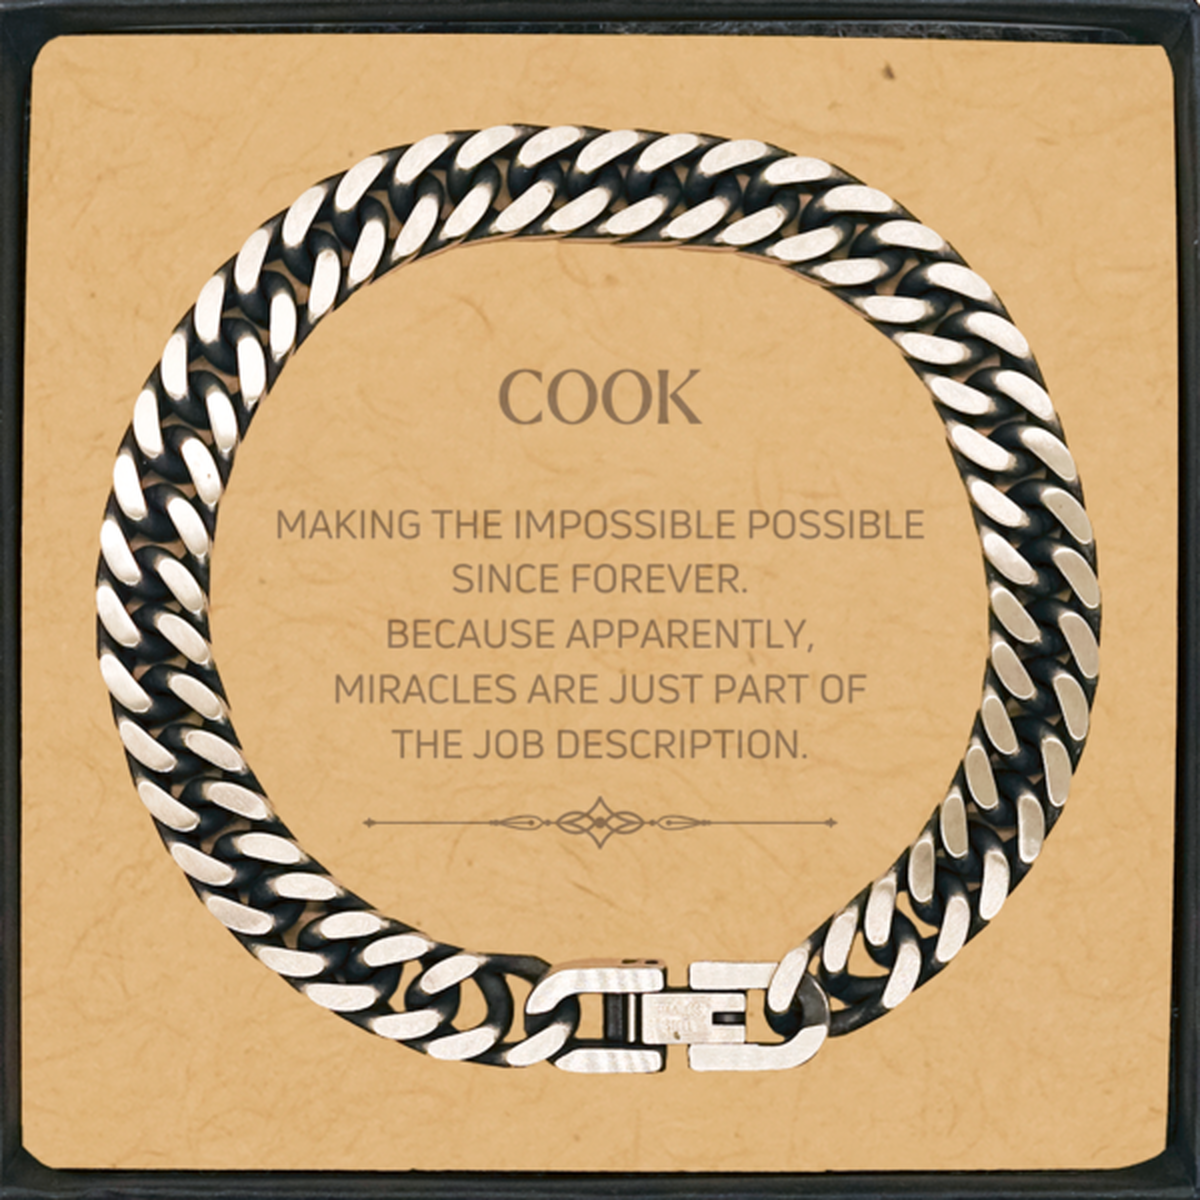 Funny Cook Gifts, Miracles are just part of the job description, Inspirational Birthday Cuban Link Chain Bracelet For Cook, Men, Women, Coworkers, Friends, Boss